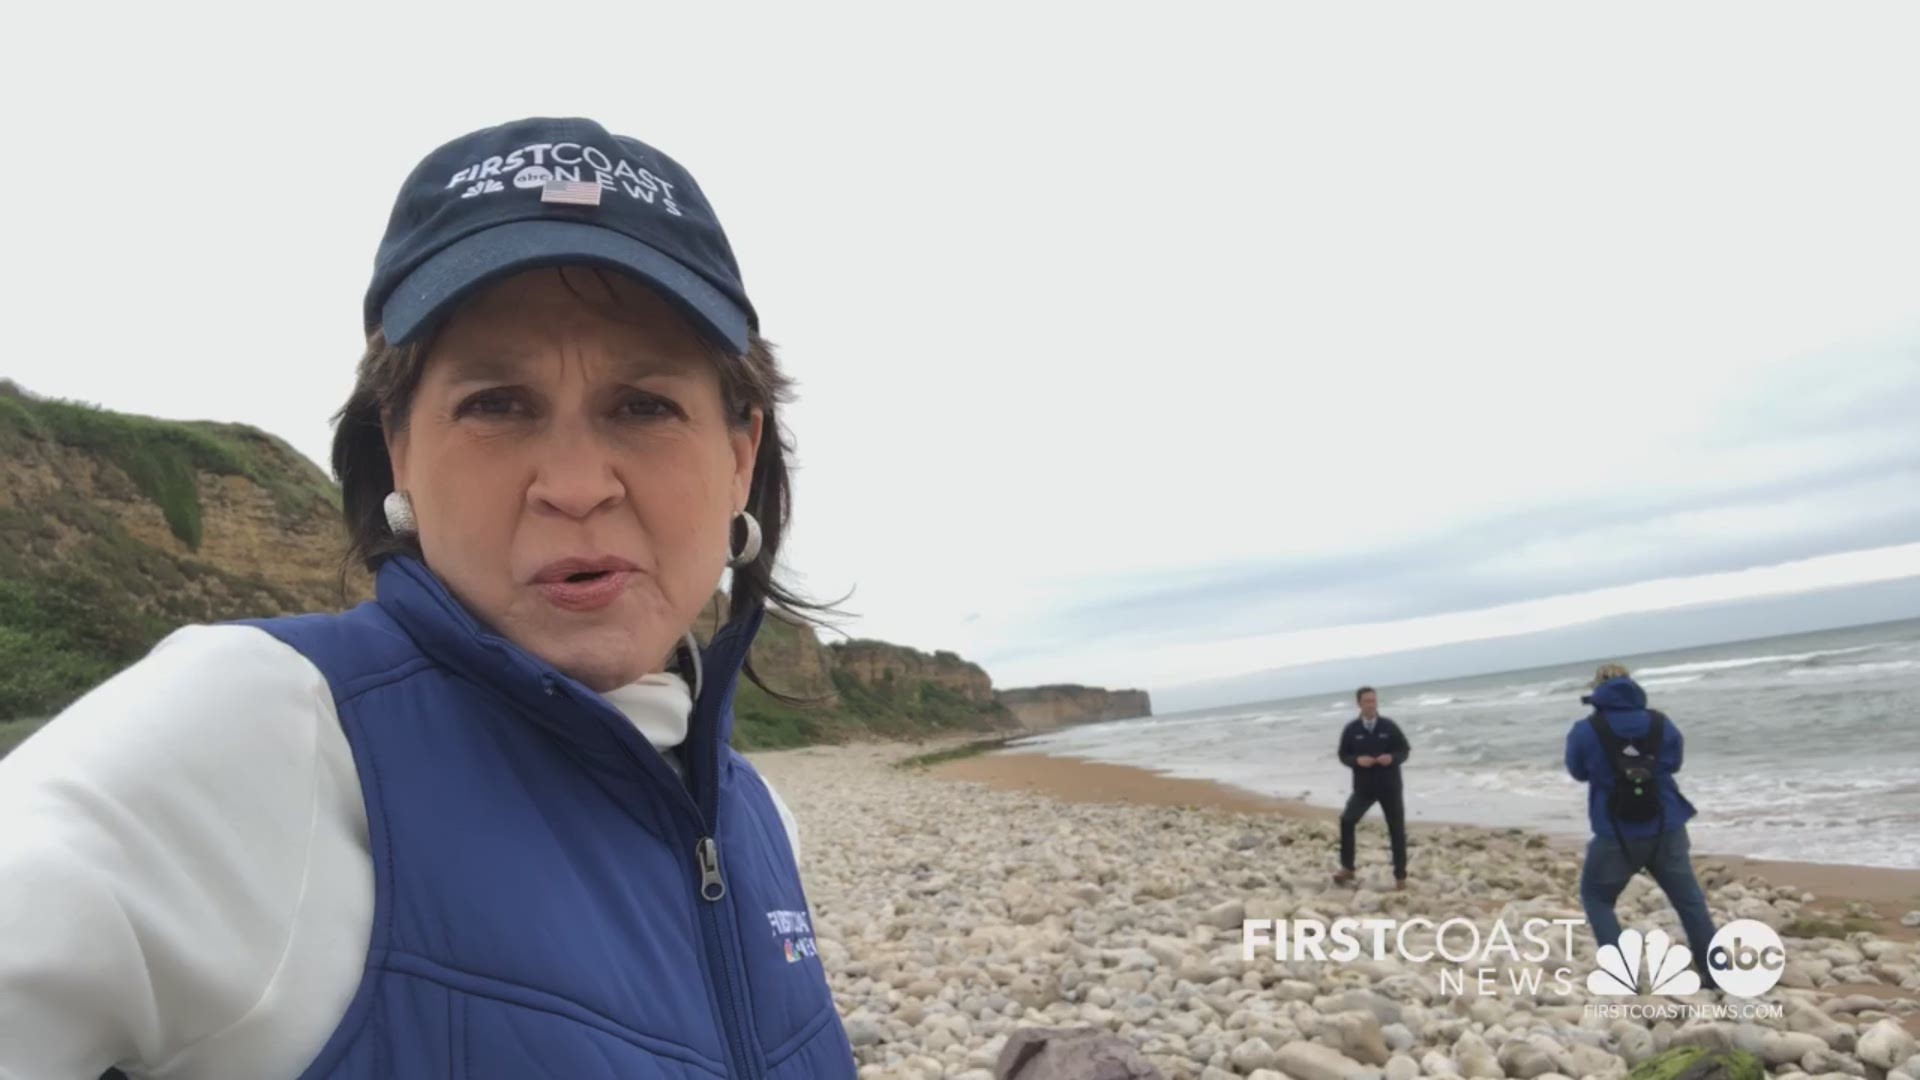 As the FCN team prepares to leave Normandy France, Jeannie Blaylock says that she will always remember one thing. That freedom really isn't free.